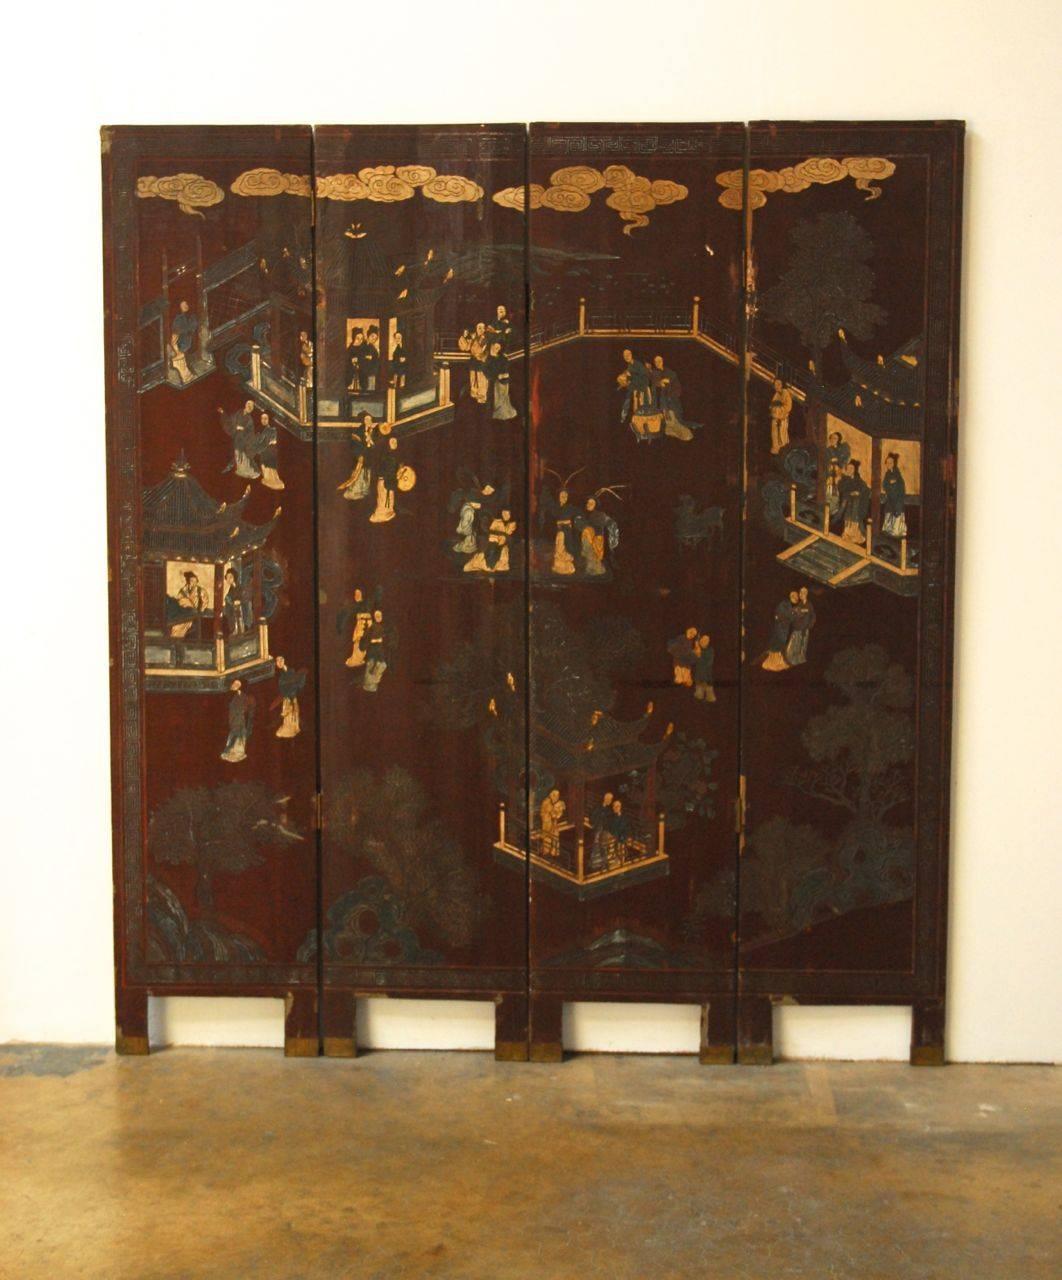 Rare, red lacquered Chinese coromandel screen that has faded into a rich plum color and patina. Four panel, double-sided screen featuring beauties in a courtyard surrounded by pagodas and trees on one side with a Greek key border. The reverse side